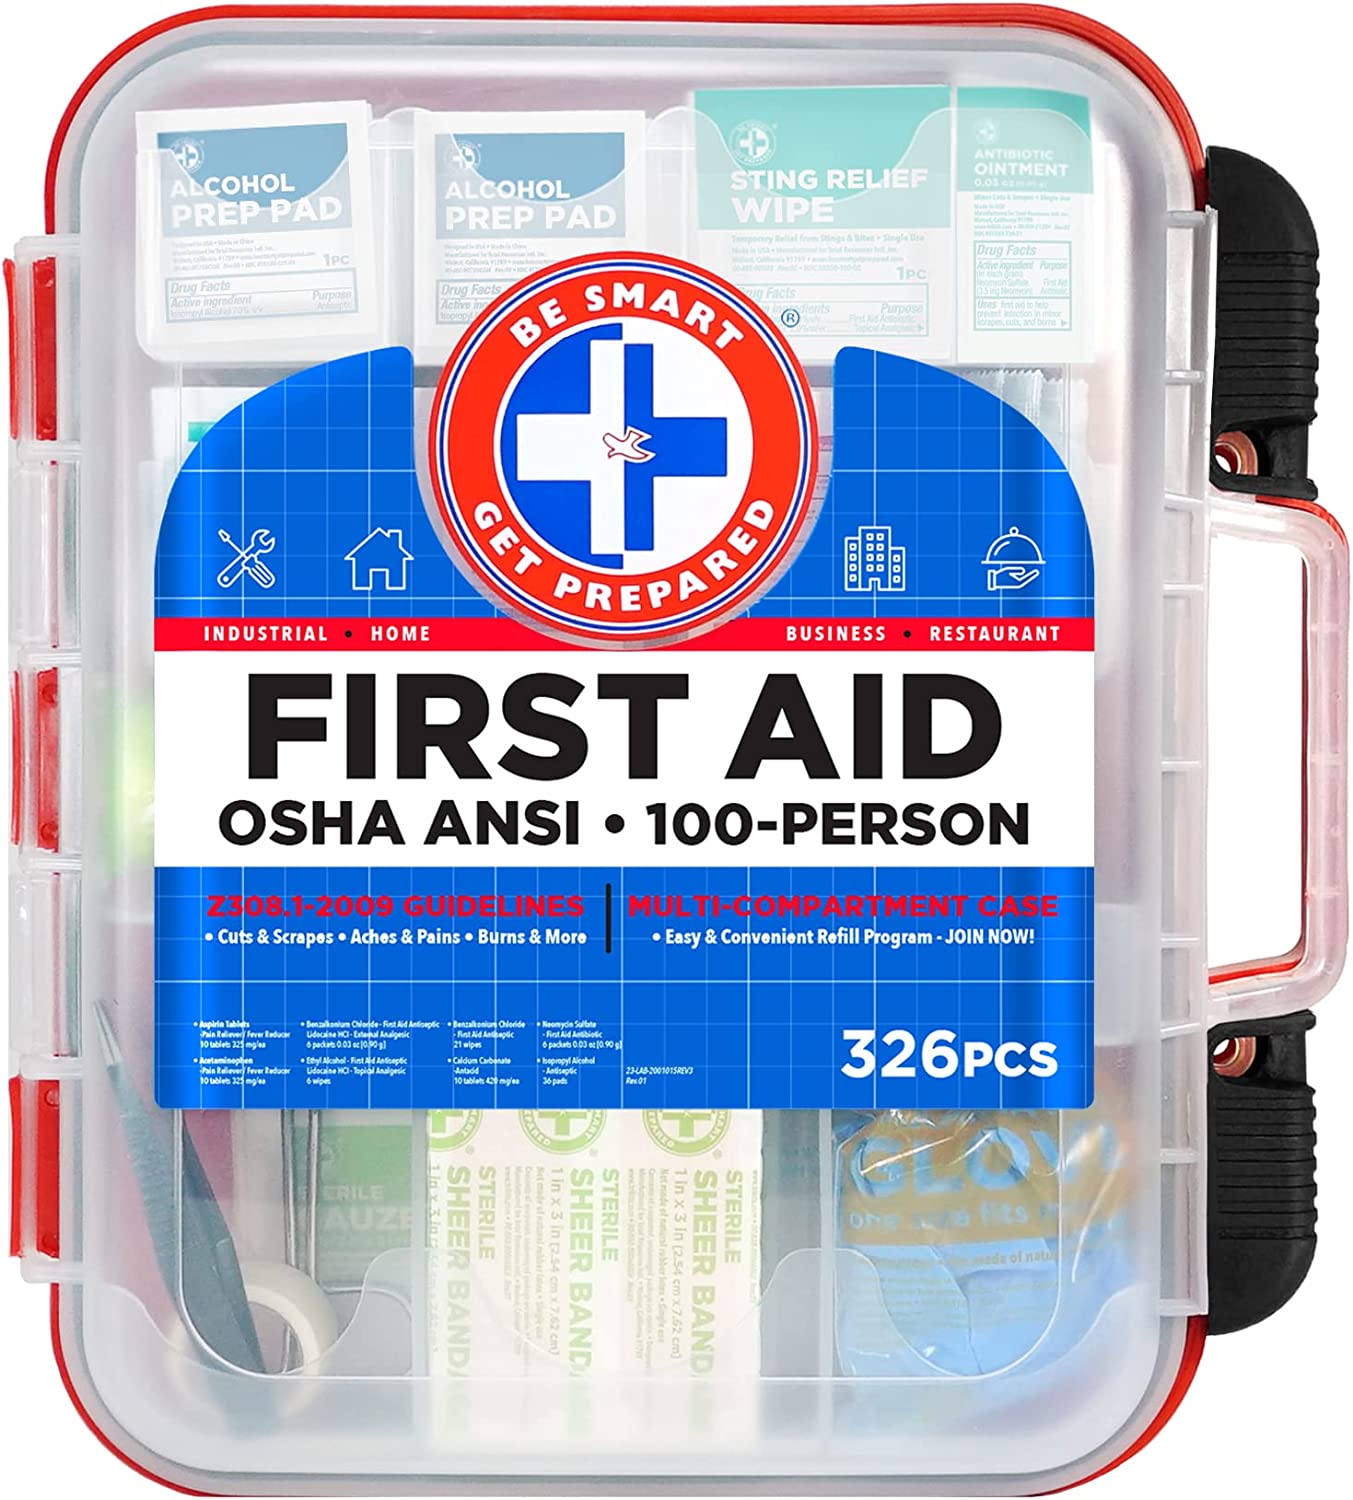 First Aid Kit Hard Red Case 326 Pieces Exceeds OSHA and ANSI Guidelines 100 People – Office, Home, Car, School, Emergency, Survival, Camping, Hunting and Sports